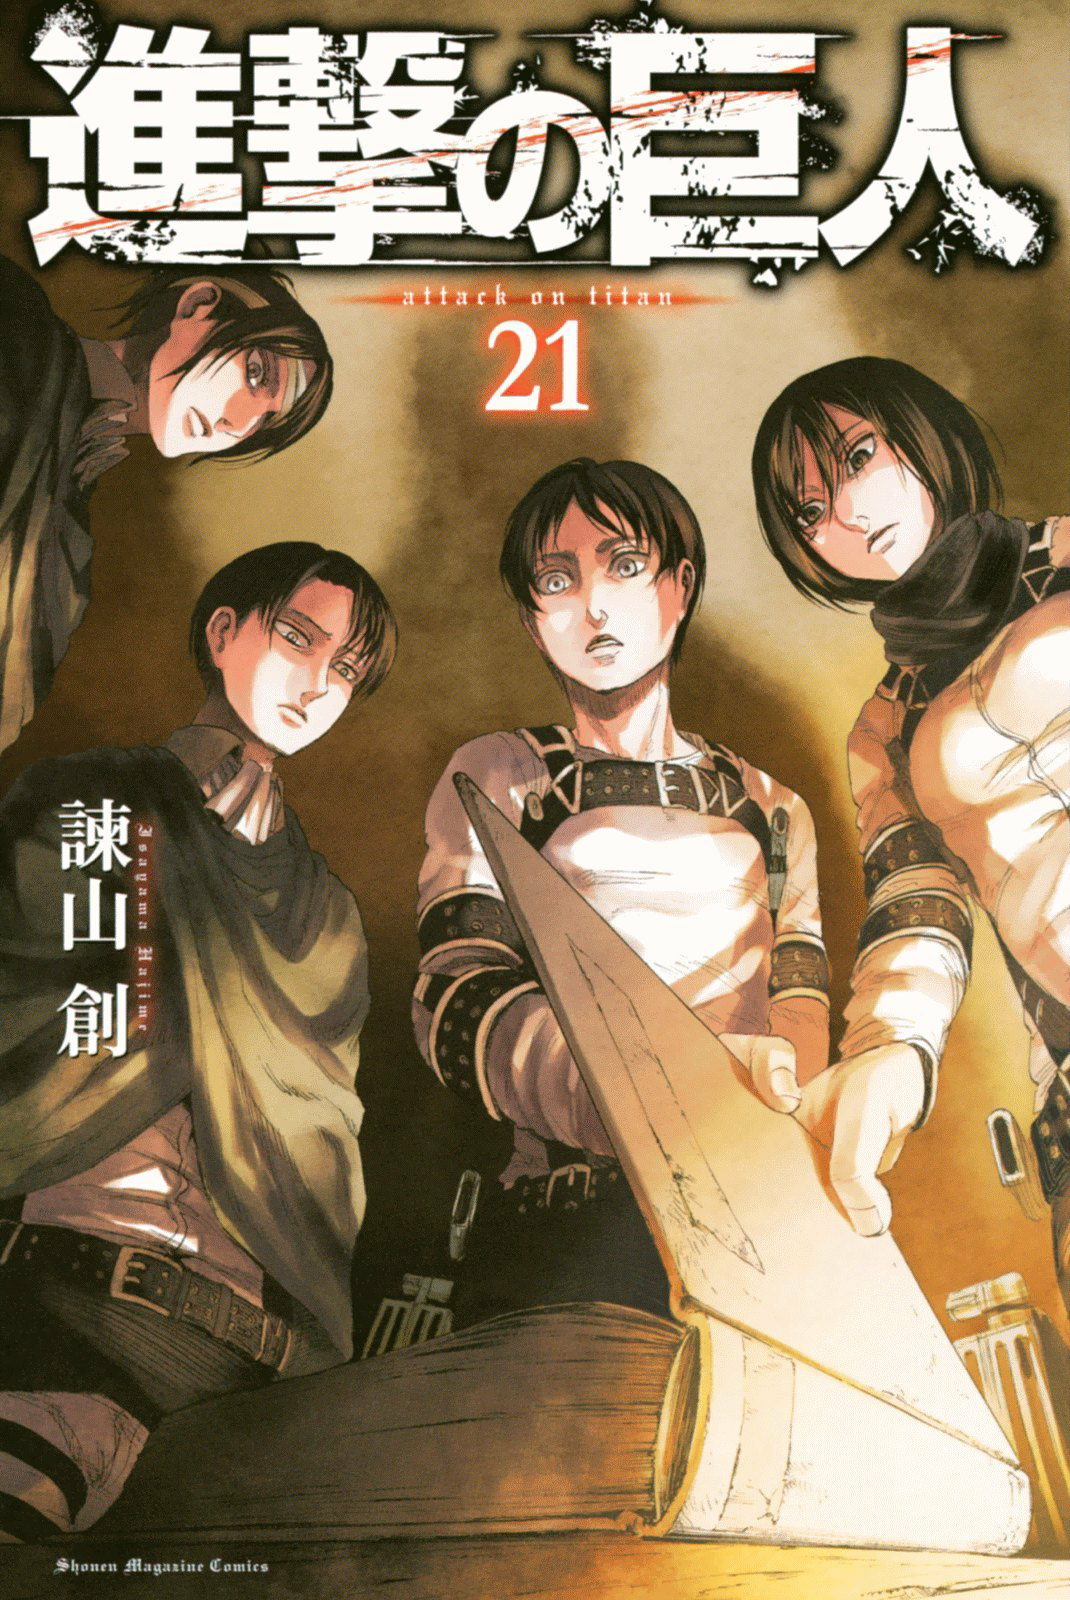 how many attack on titan manga are there